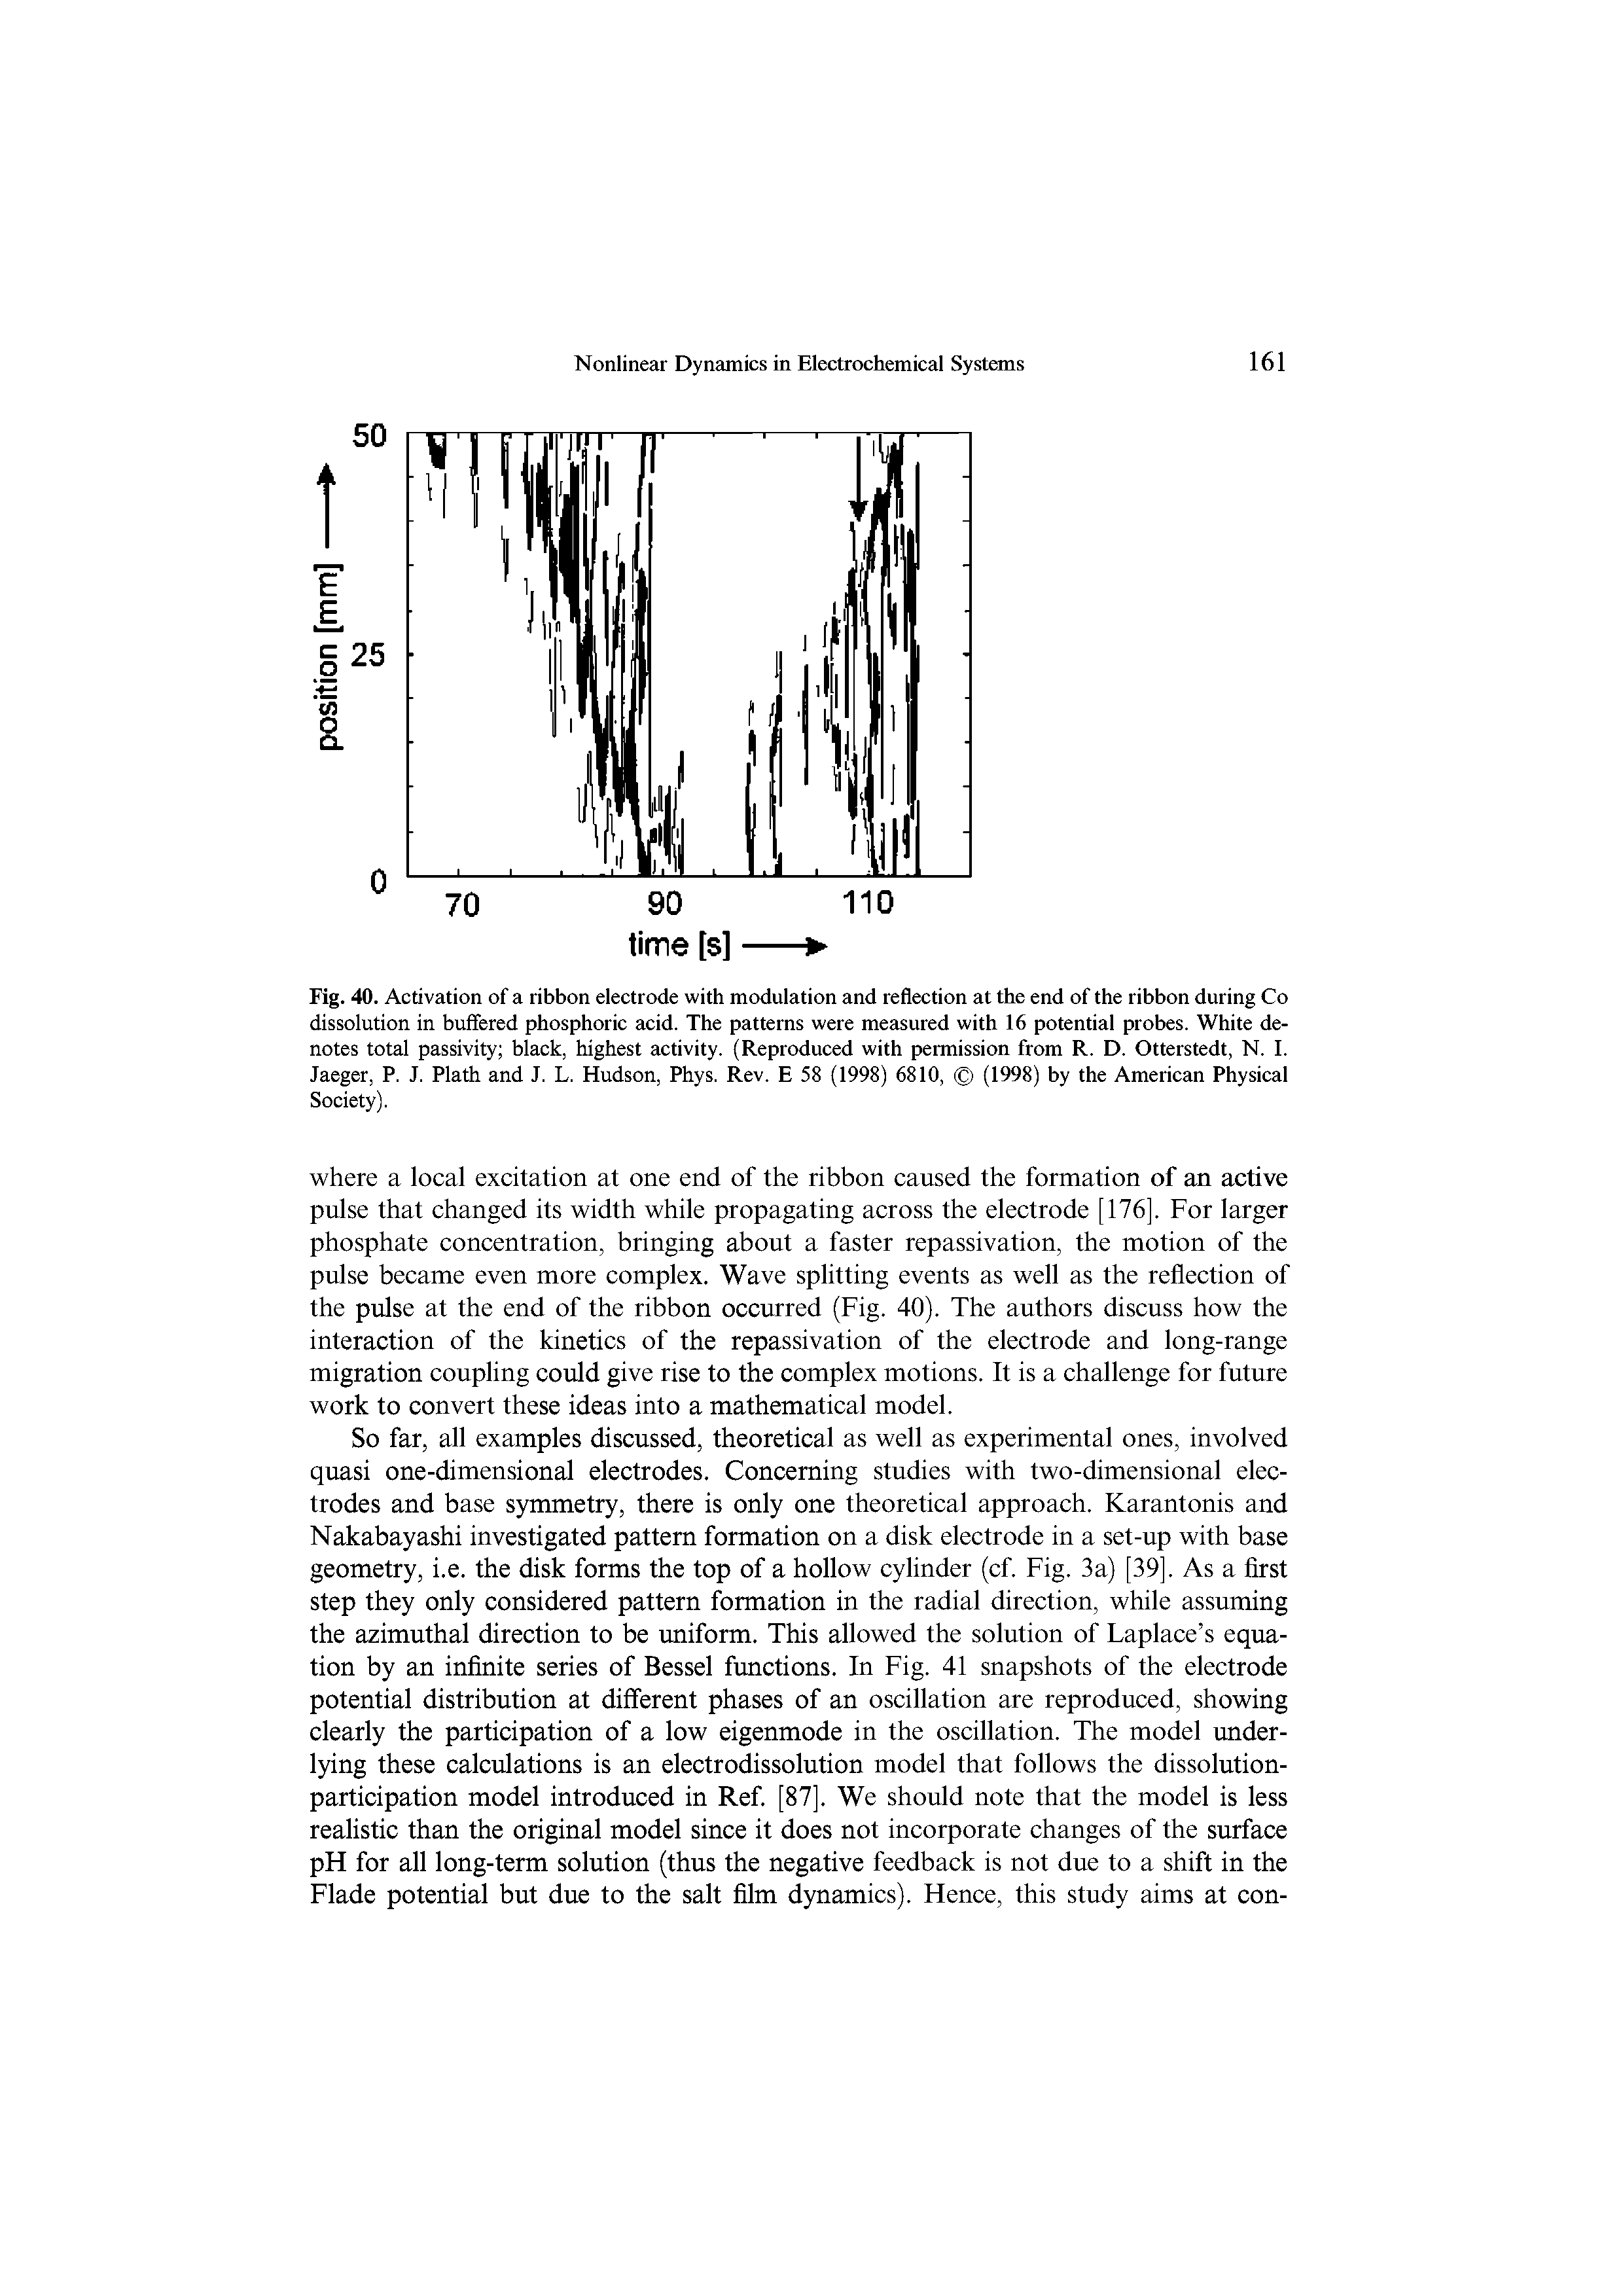 Fig. 40. Activation of a ribbon electrode with modulation and reflection at the end of the ribbon during Co dissolution in buffered phosphoric acid. The patterns were measured with 16 potential probes. White denotes total passivity black, highest activity. (Reproduced with permission from R. D. Otterstedt, N. I. Jaeger, P. J. Plath and J. L. Hudson, Phys. Rev. E 58 (1998) 6810, (1998) by the American Physical Society).